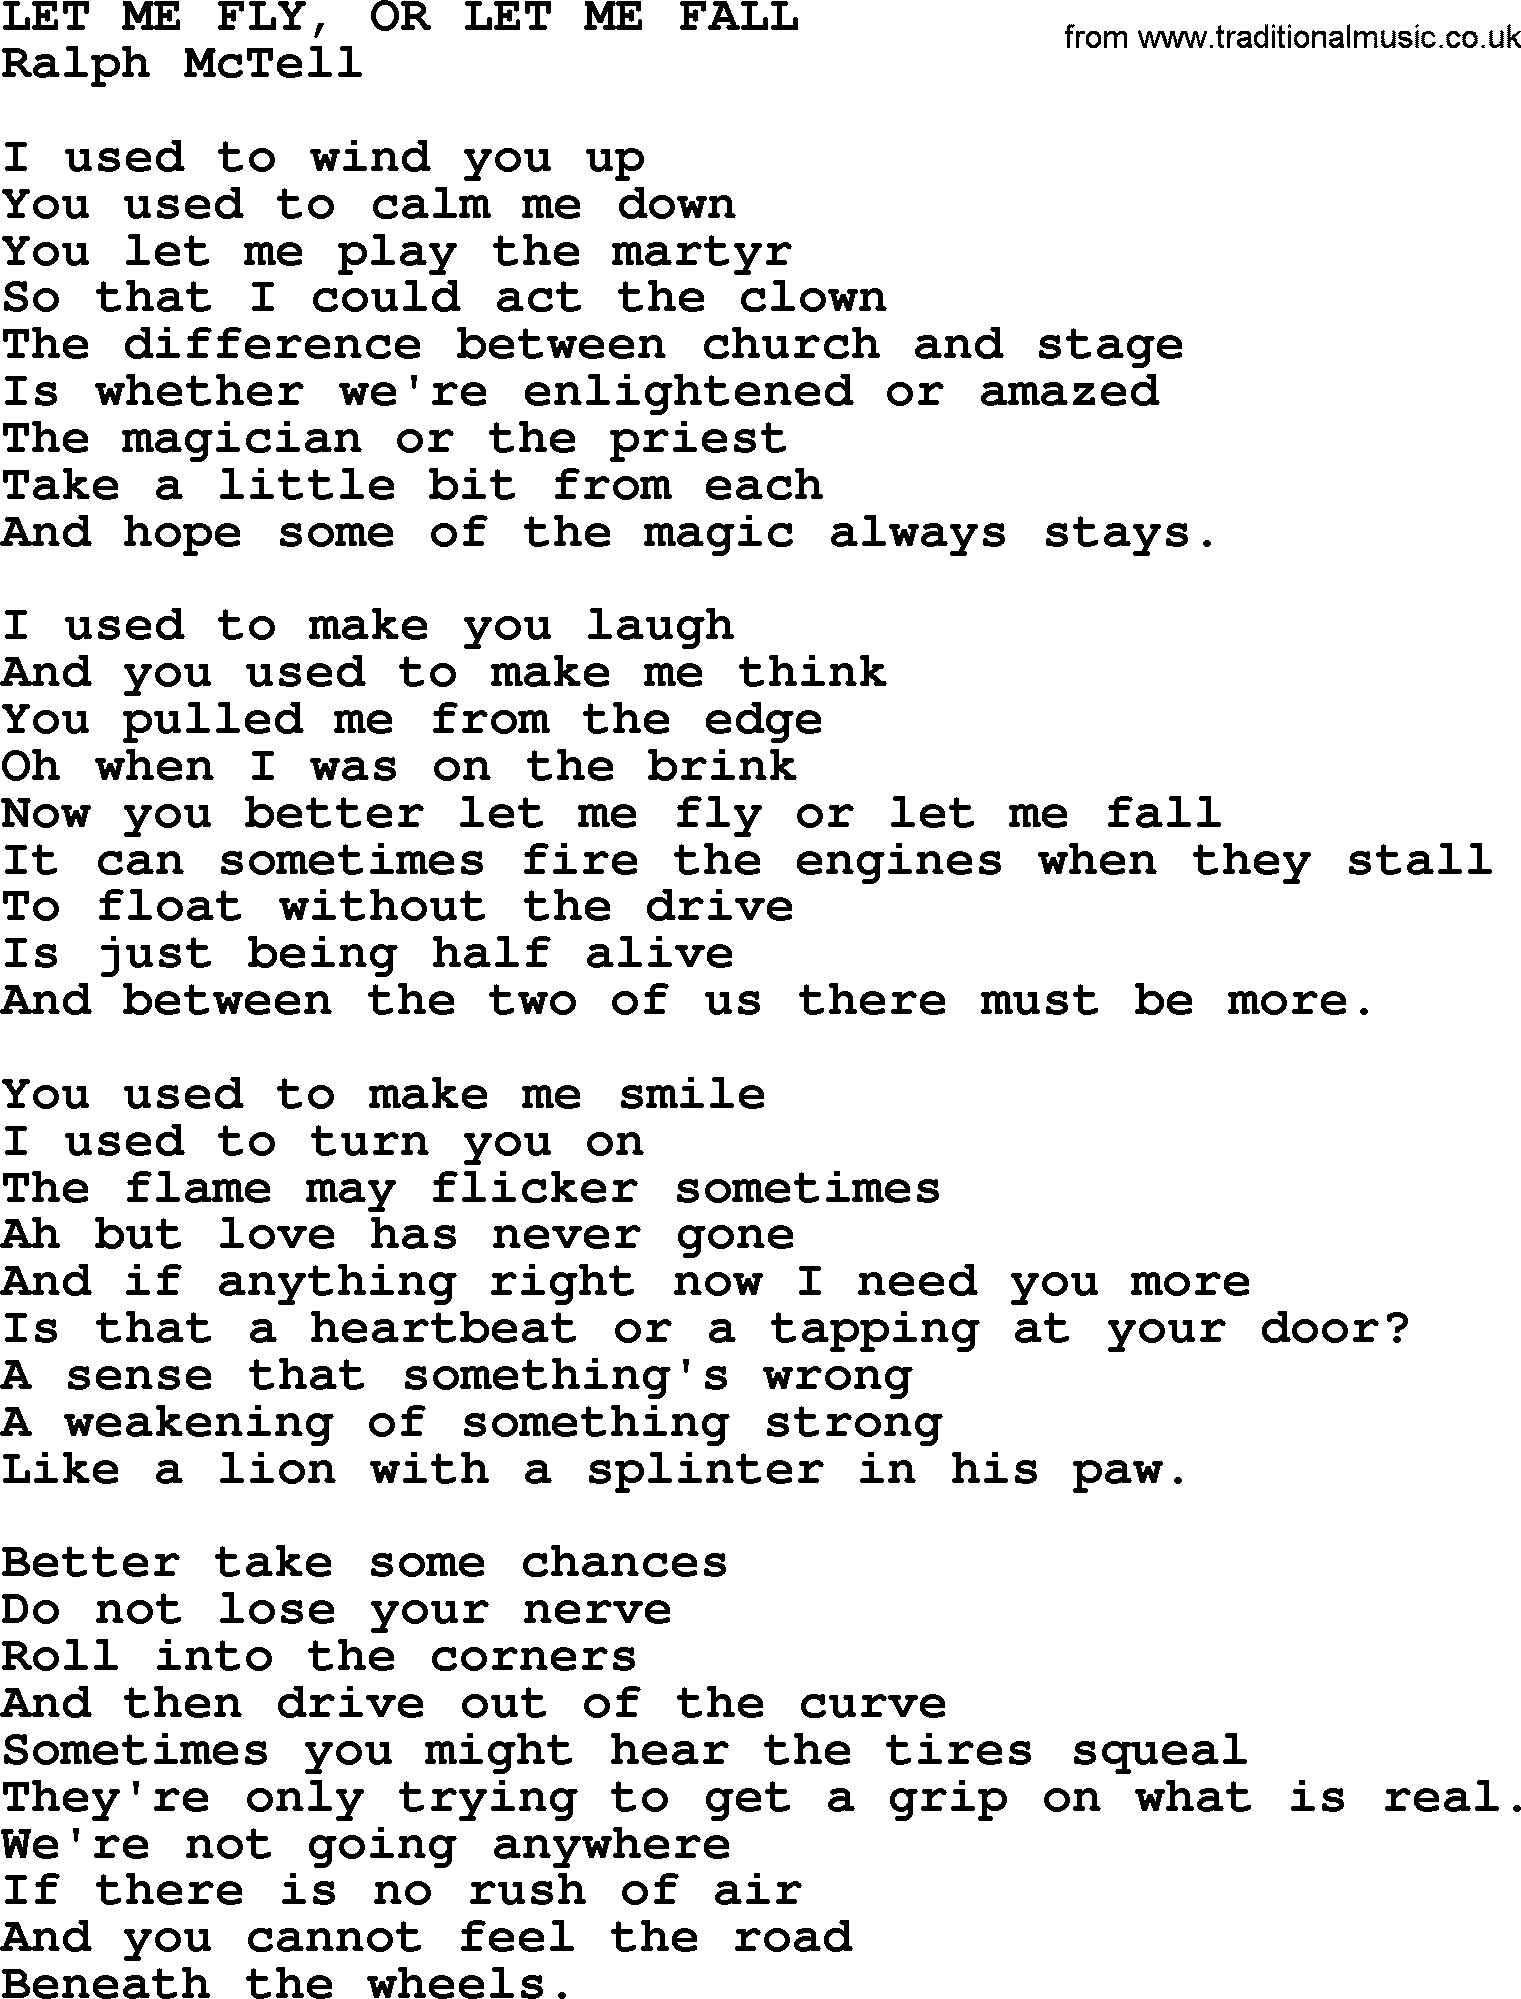 Ralph McTell Song: Let Me Fly, Or Let Me Fall, lyrics